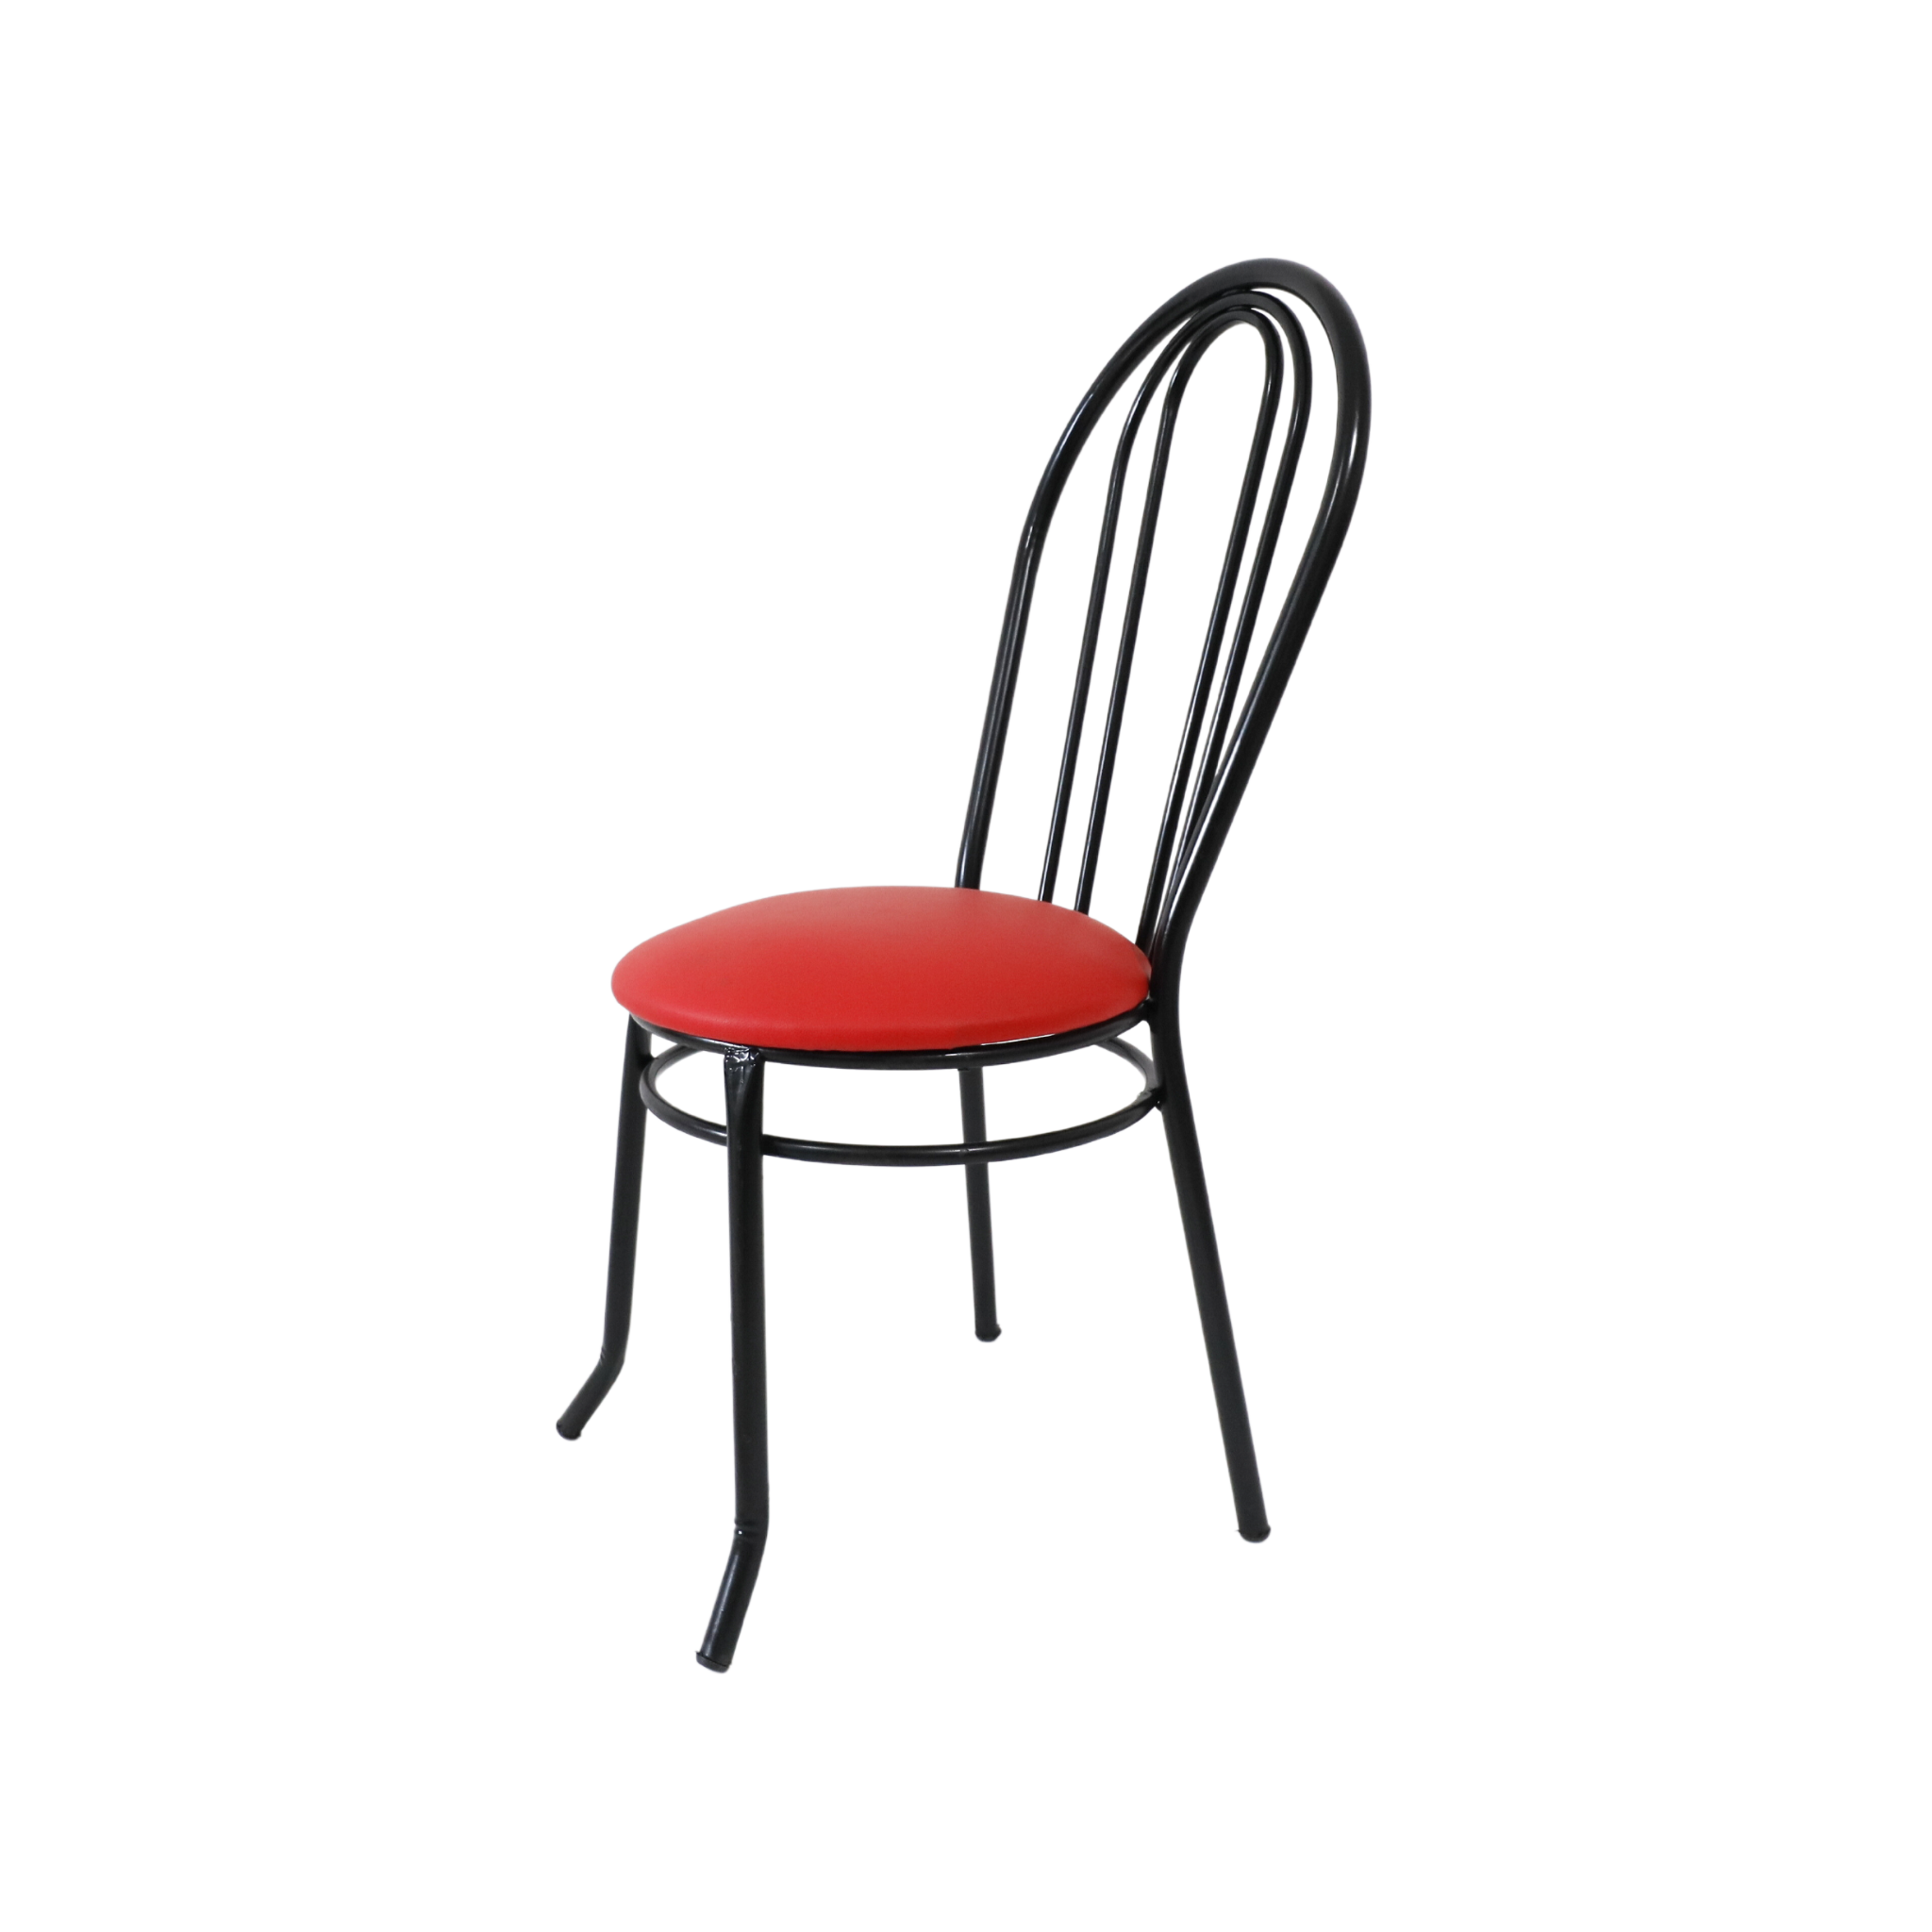 VOWI Metal Dining Chair AF Home